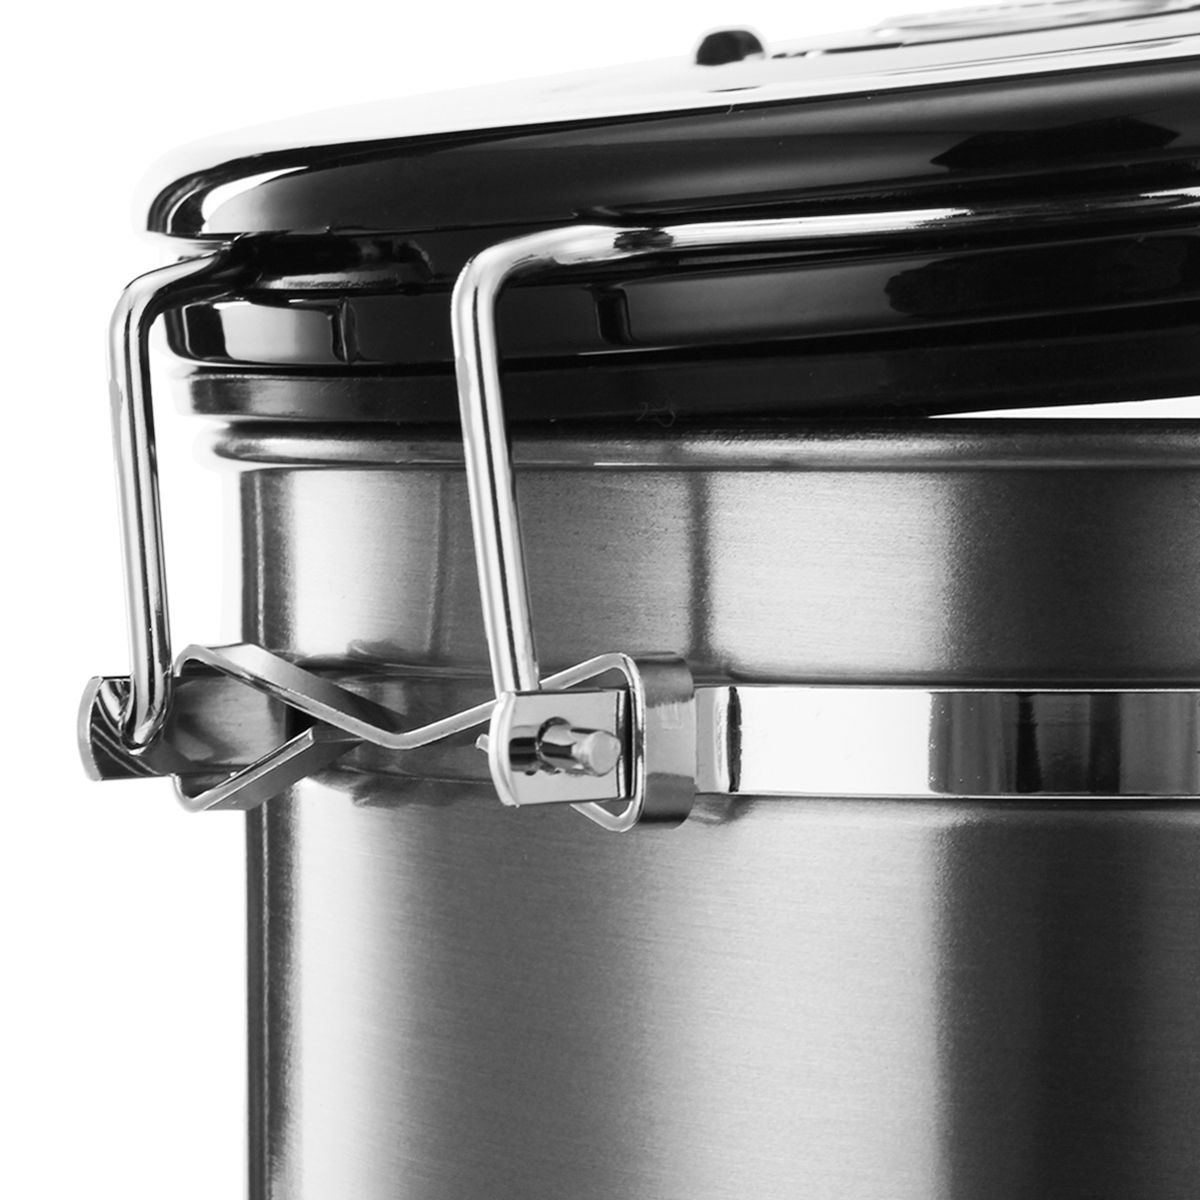 15L-Silver-Stainless-Steel-Sealed-Coffee-Bean-Tea-Storage-Canister-Kitchen-Storage-Container-1305839